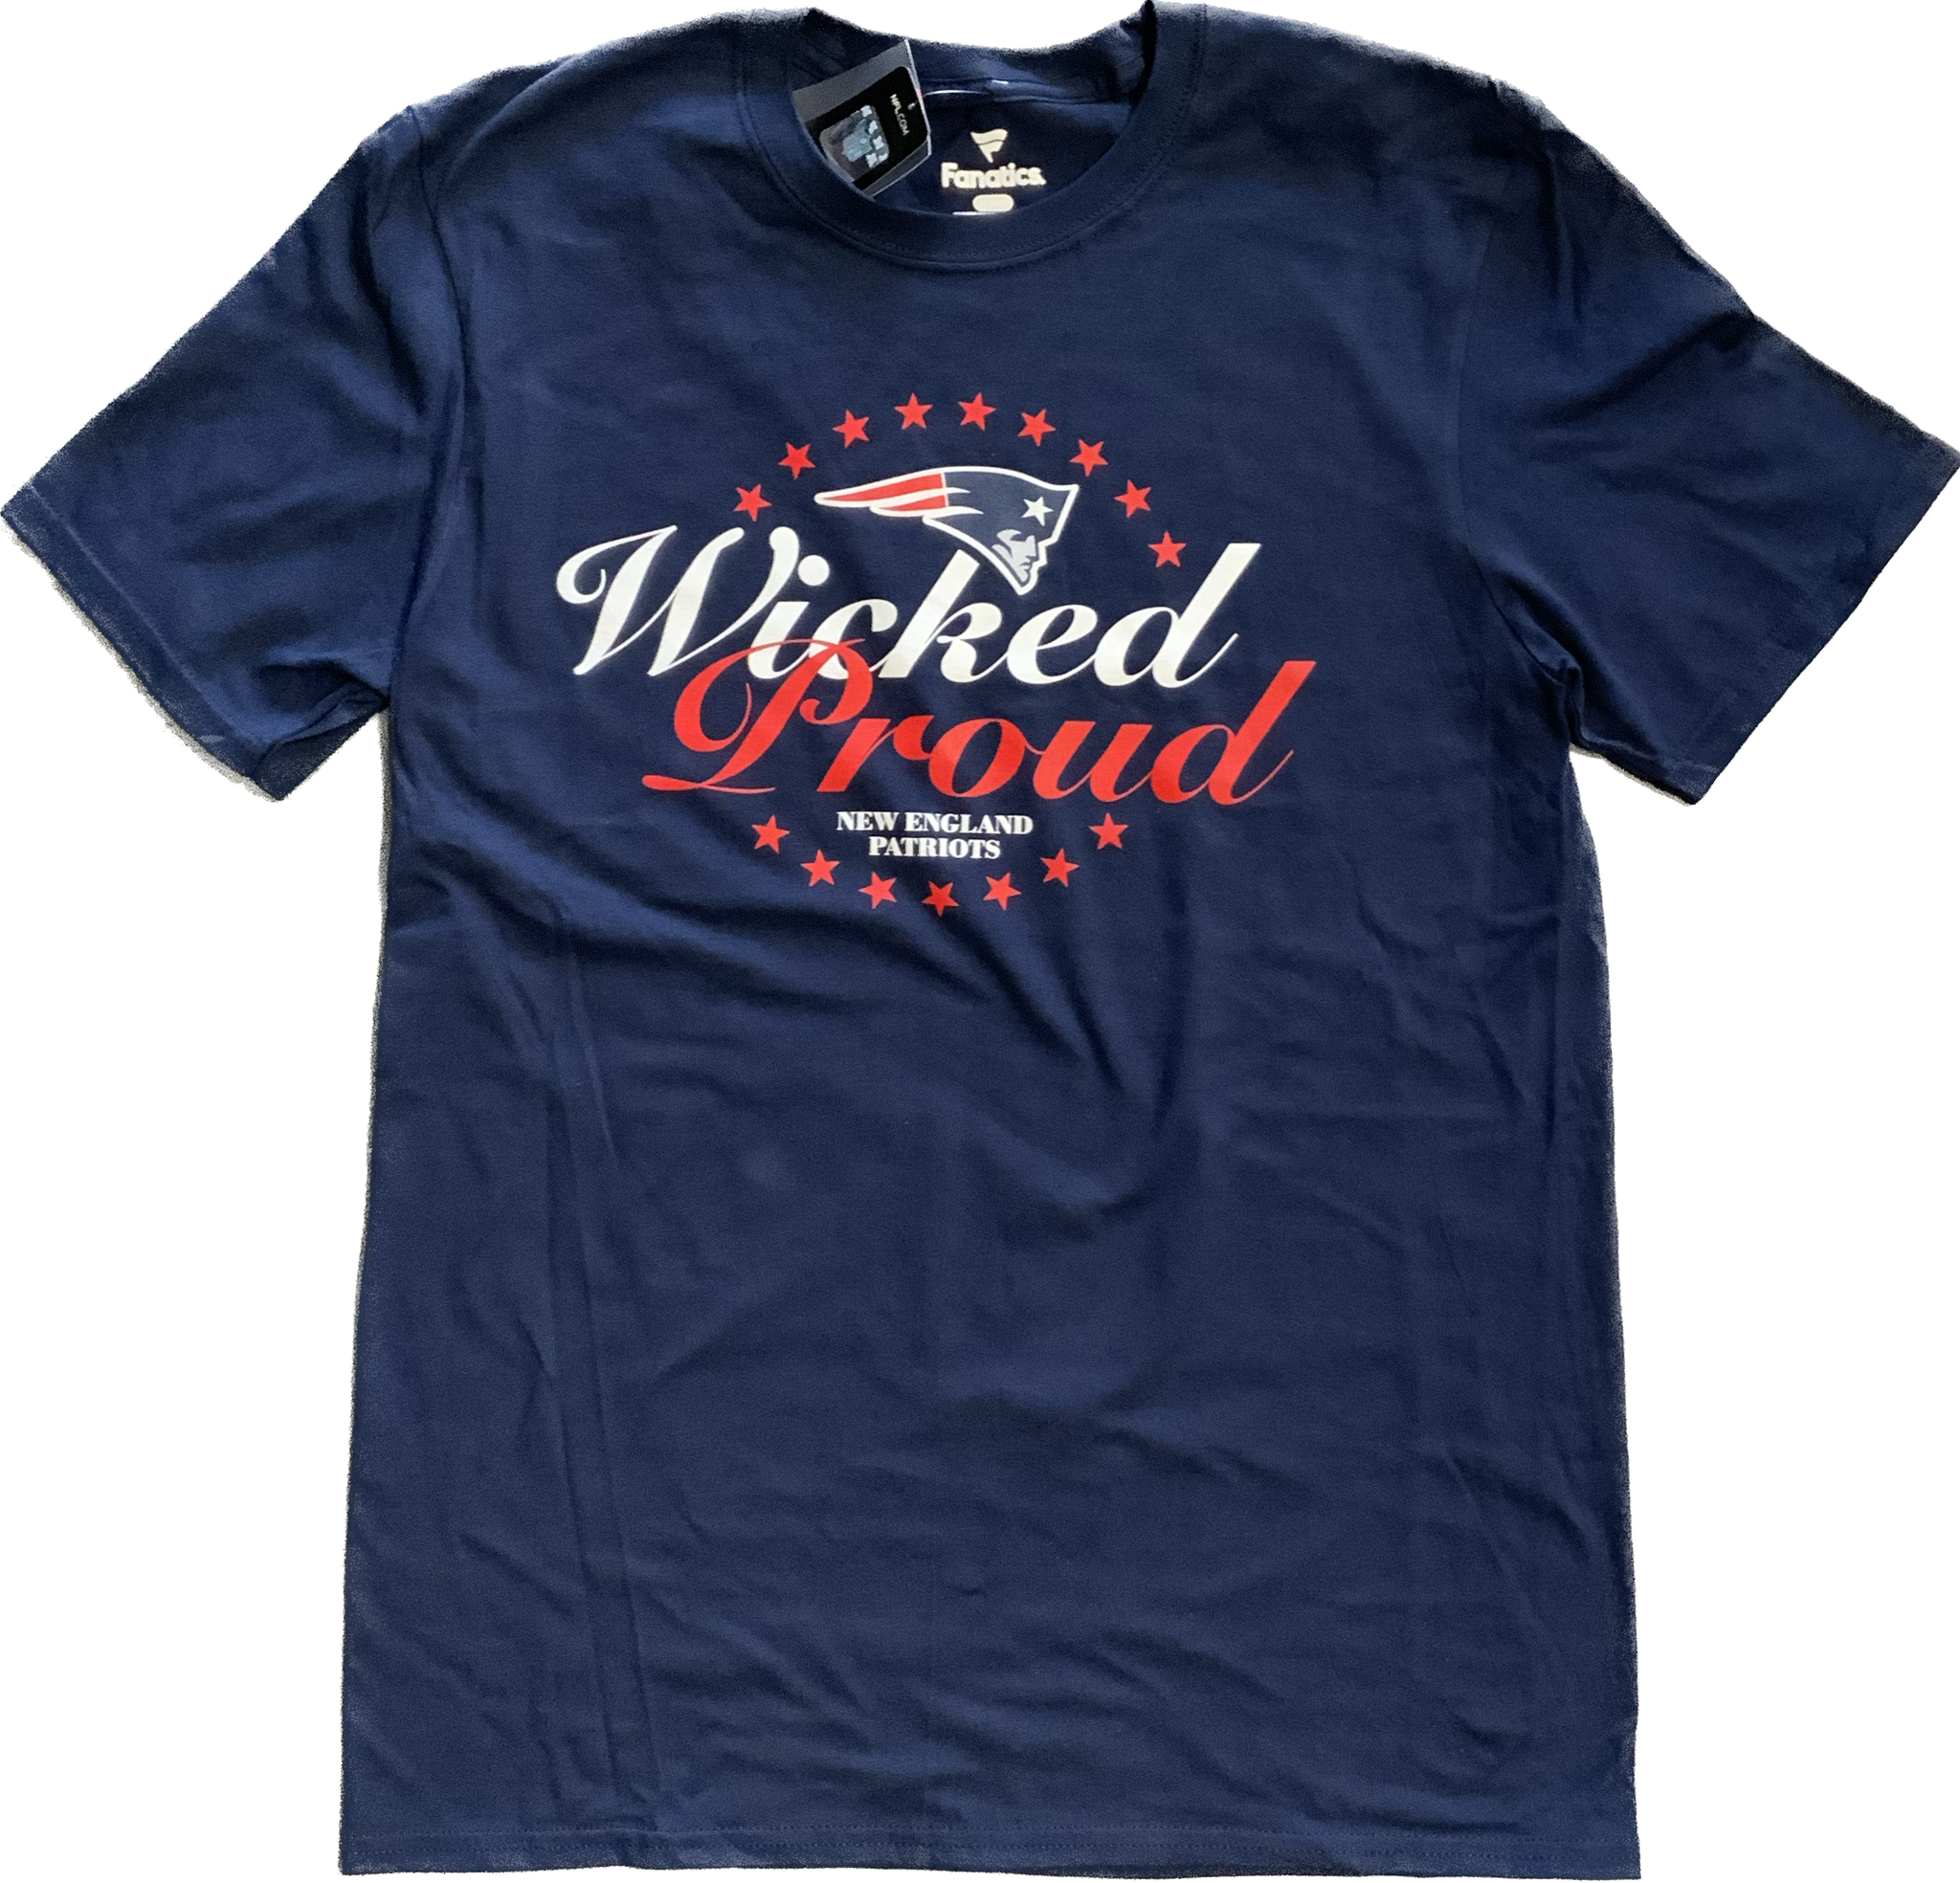 New England Patriots Wicked Proud Navy T-Shirt